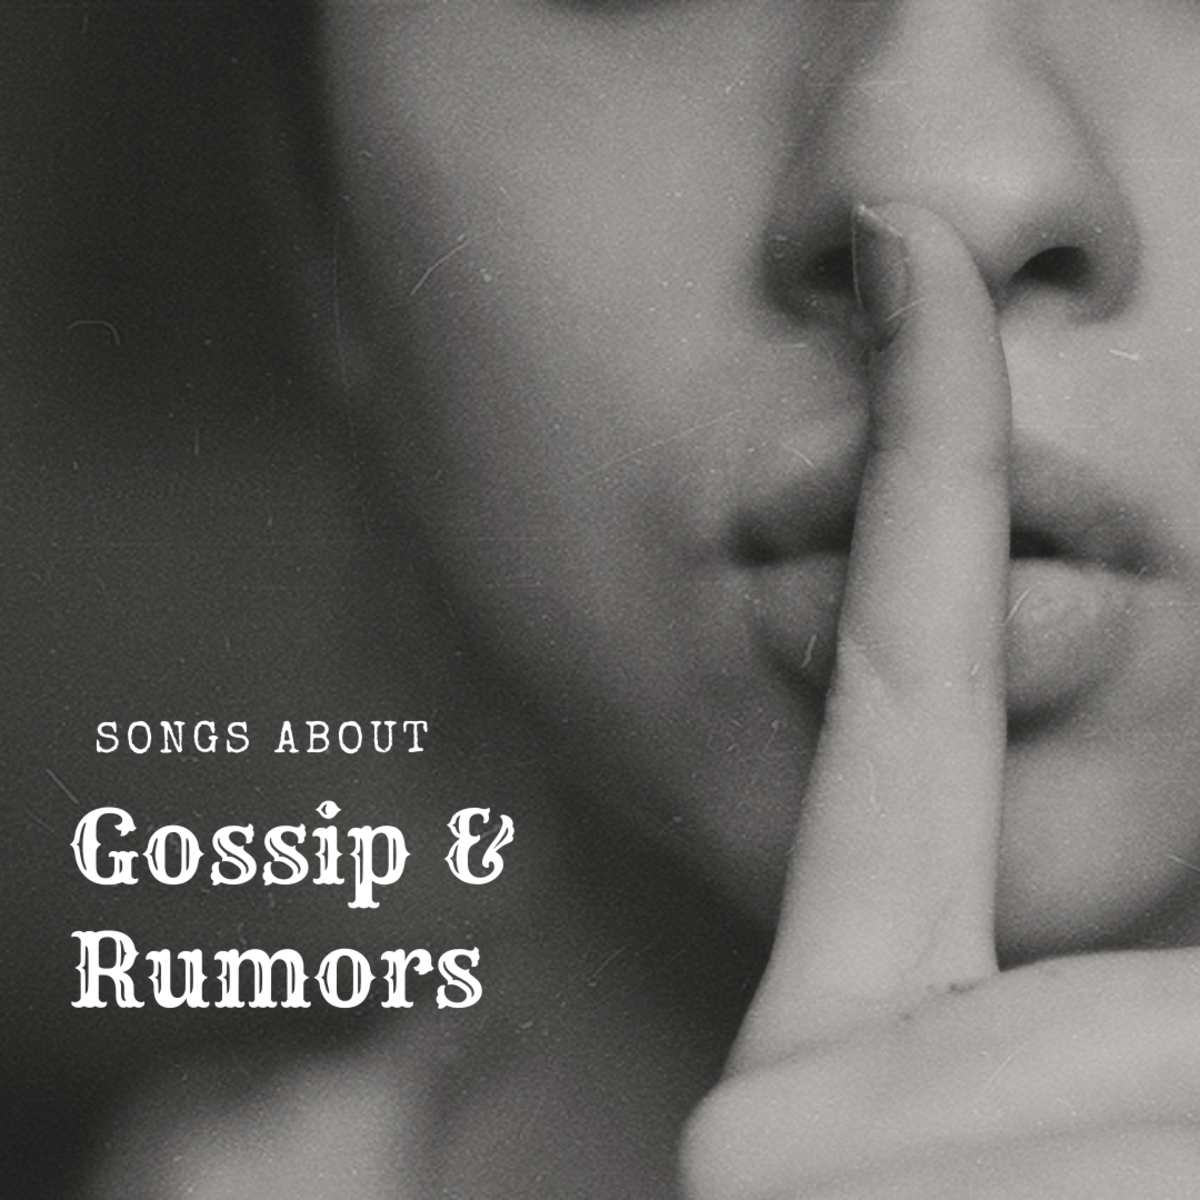 Make a playlist about gossip, rumors, and innuendo using our long list of pop, rock, and country songs on the topic.